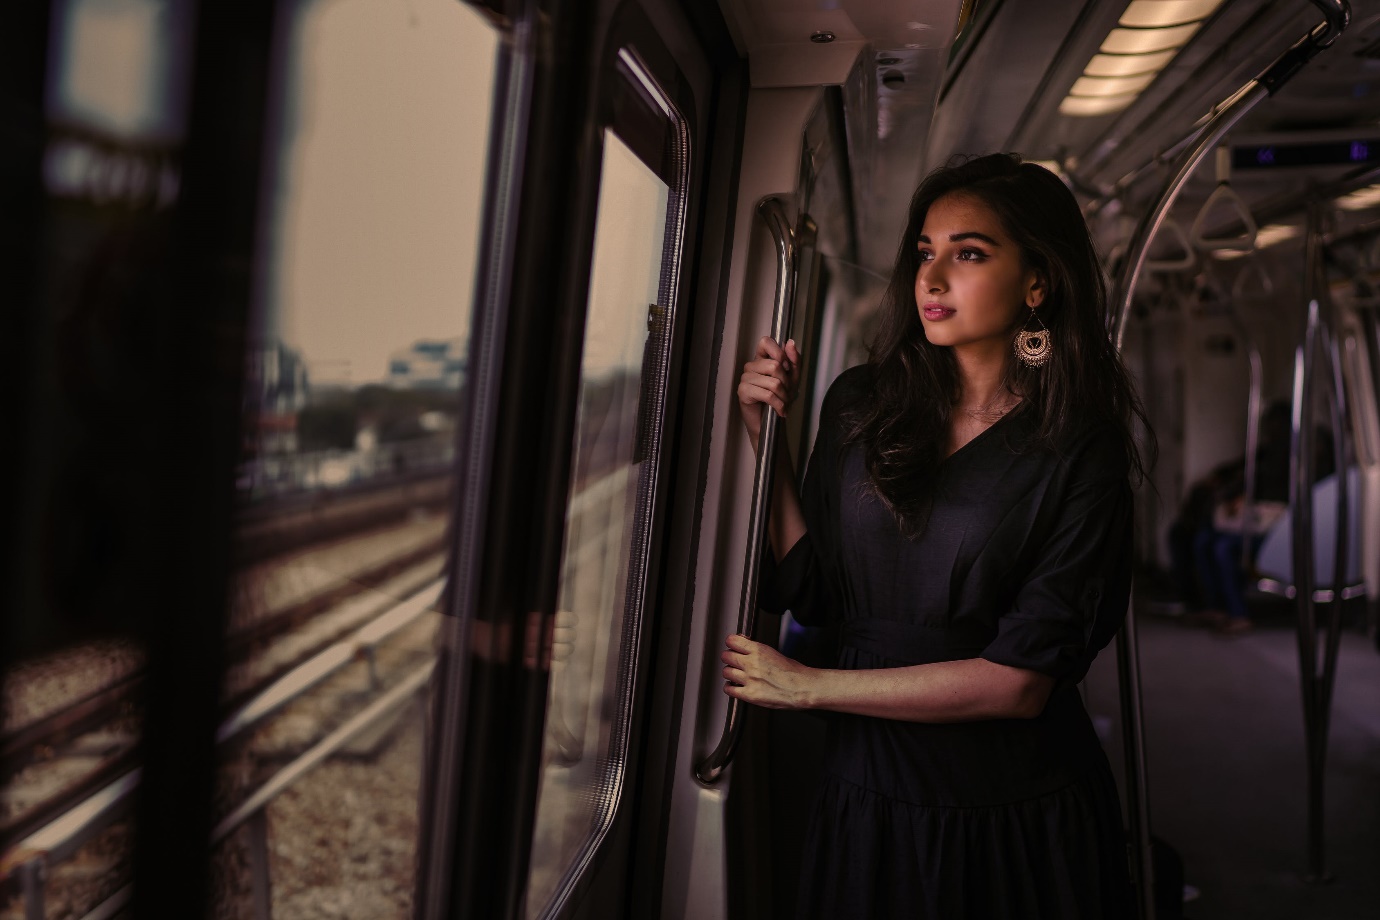 Photo of Woman Standing Inside Train Holding on Metal Rail While Looking Outside